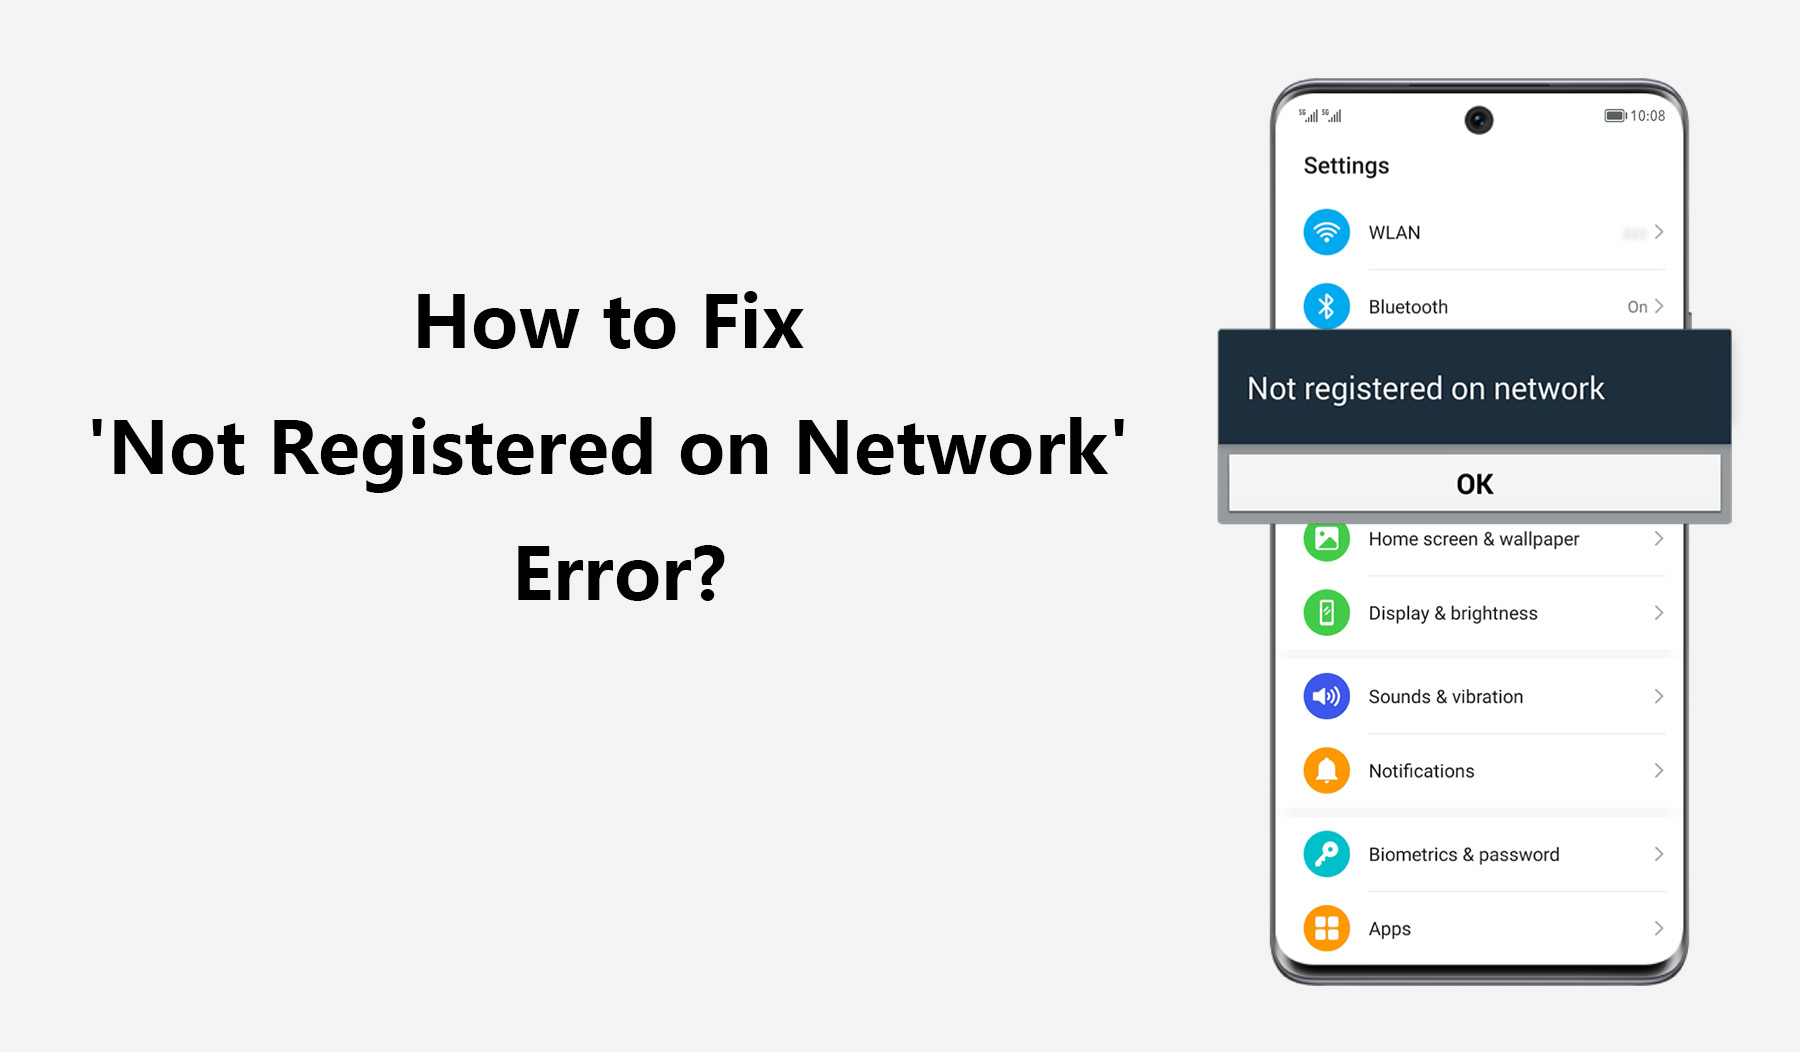 How to Fix 'Not Registered on Network' Error